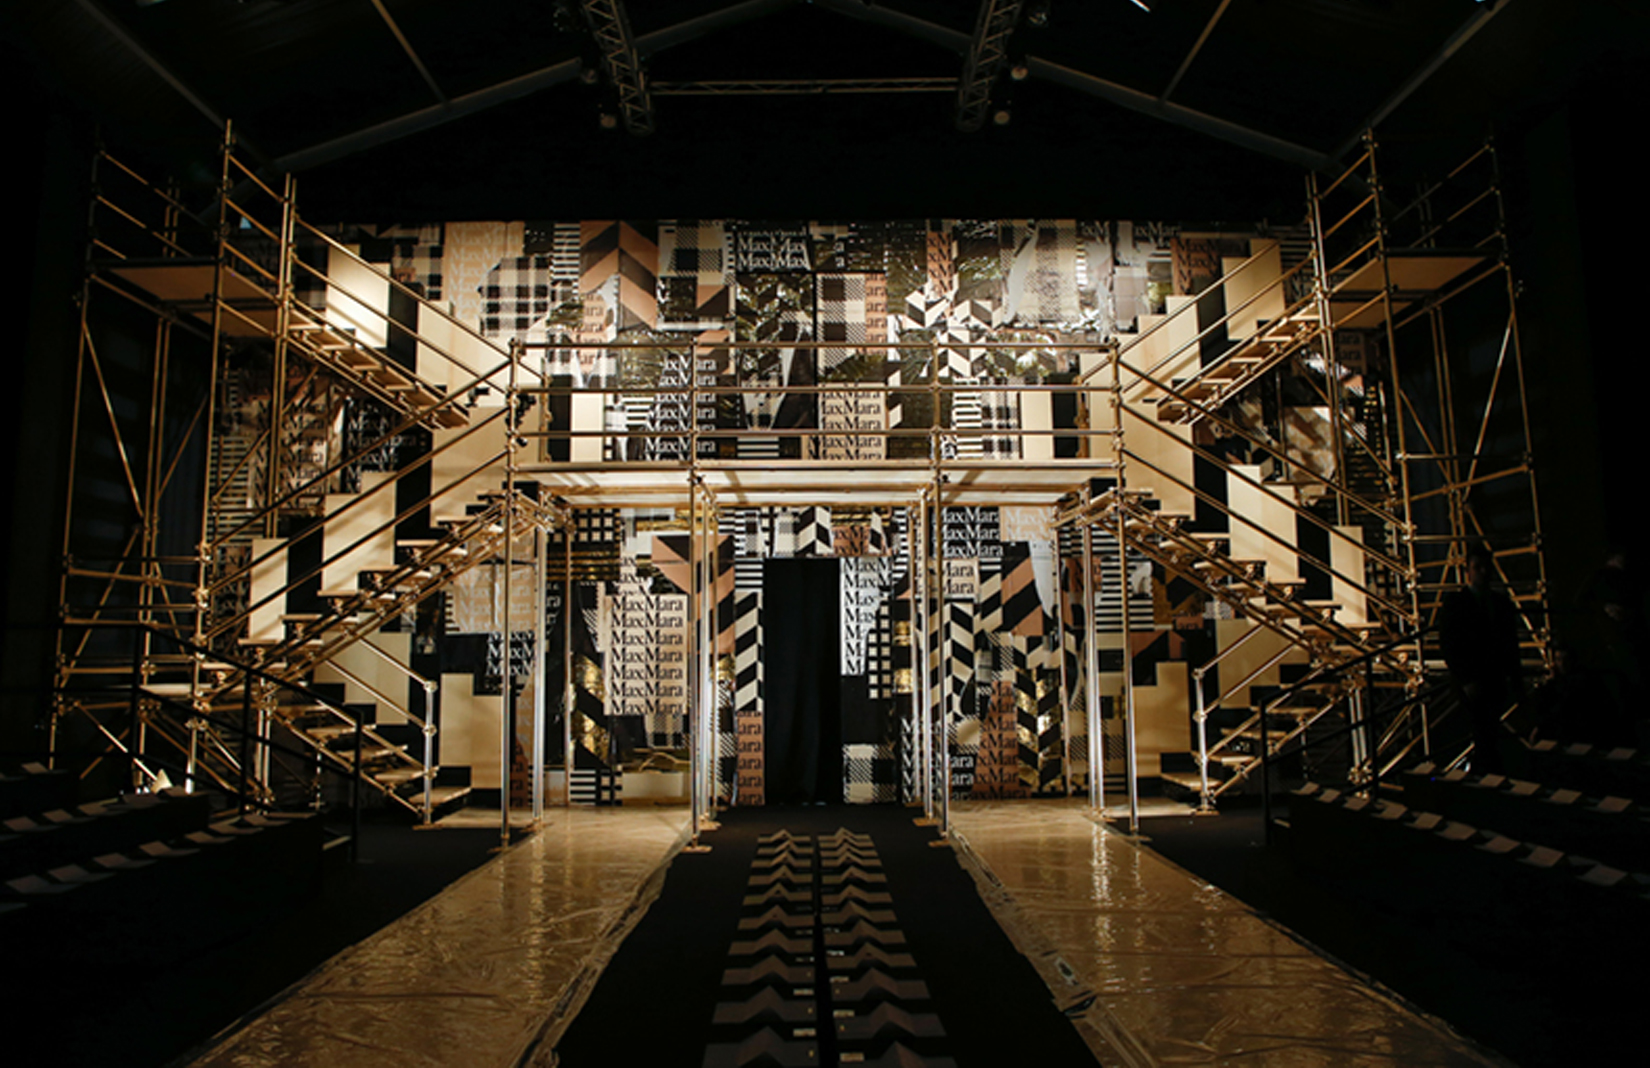 Chameleon Visuals created a gold-scaffolding set for MaxMara's AW16 catwalk show